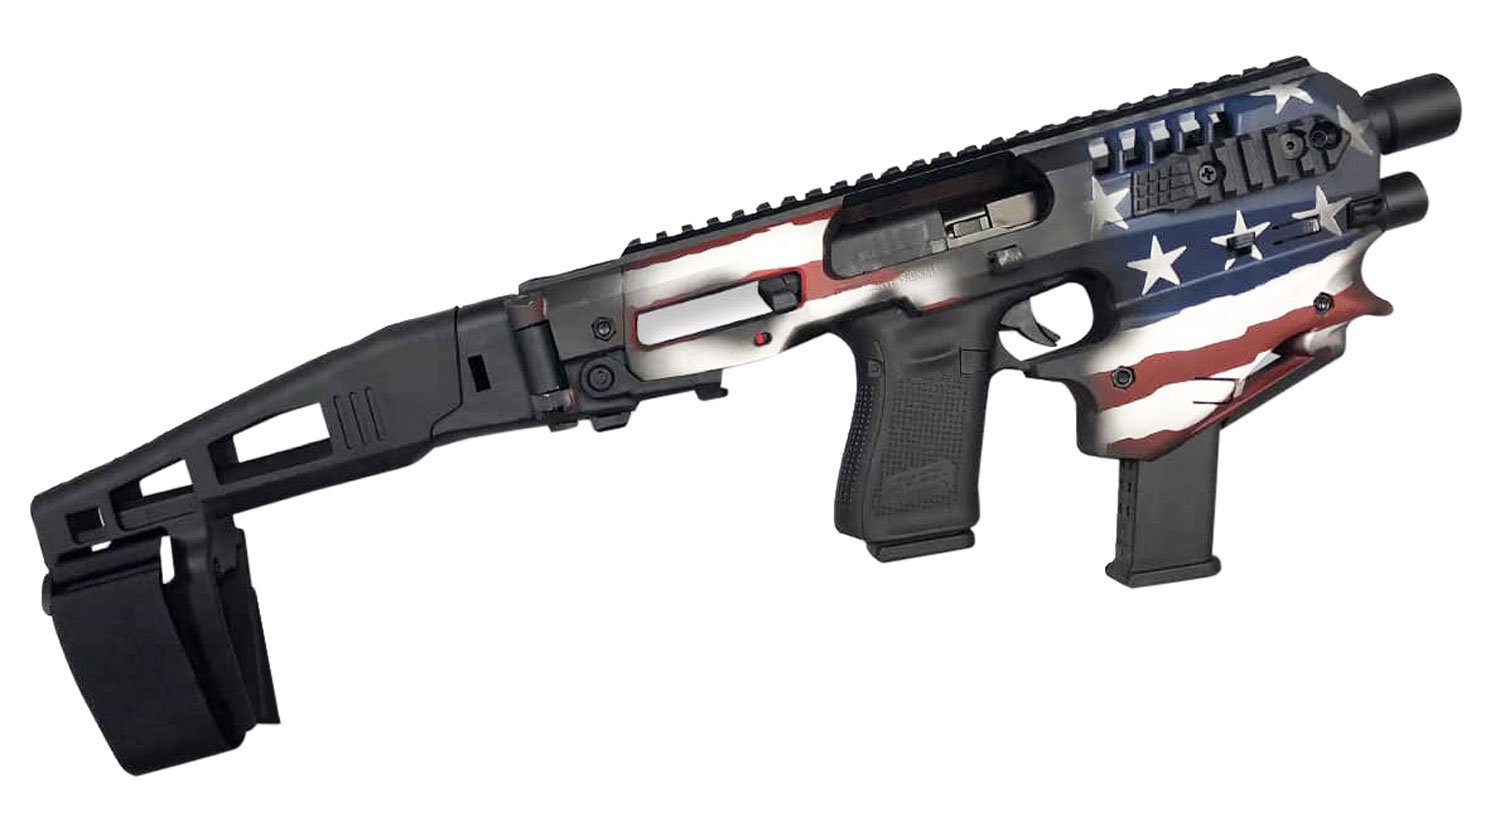 Command Arms MCKUSA MCK Limited Edition Conversion Kit Synthetic Black USA Flag for Glock G17,19,19x Gen3-5